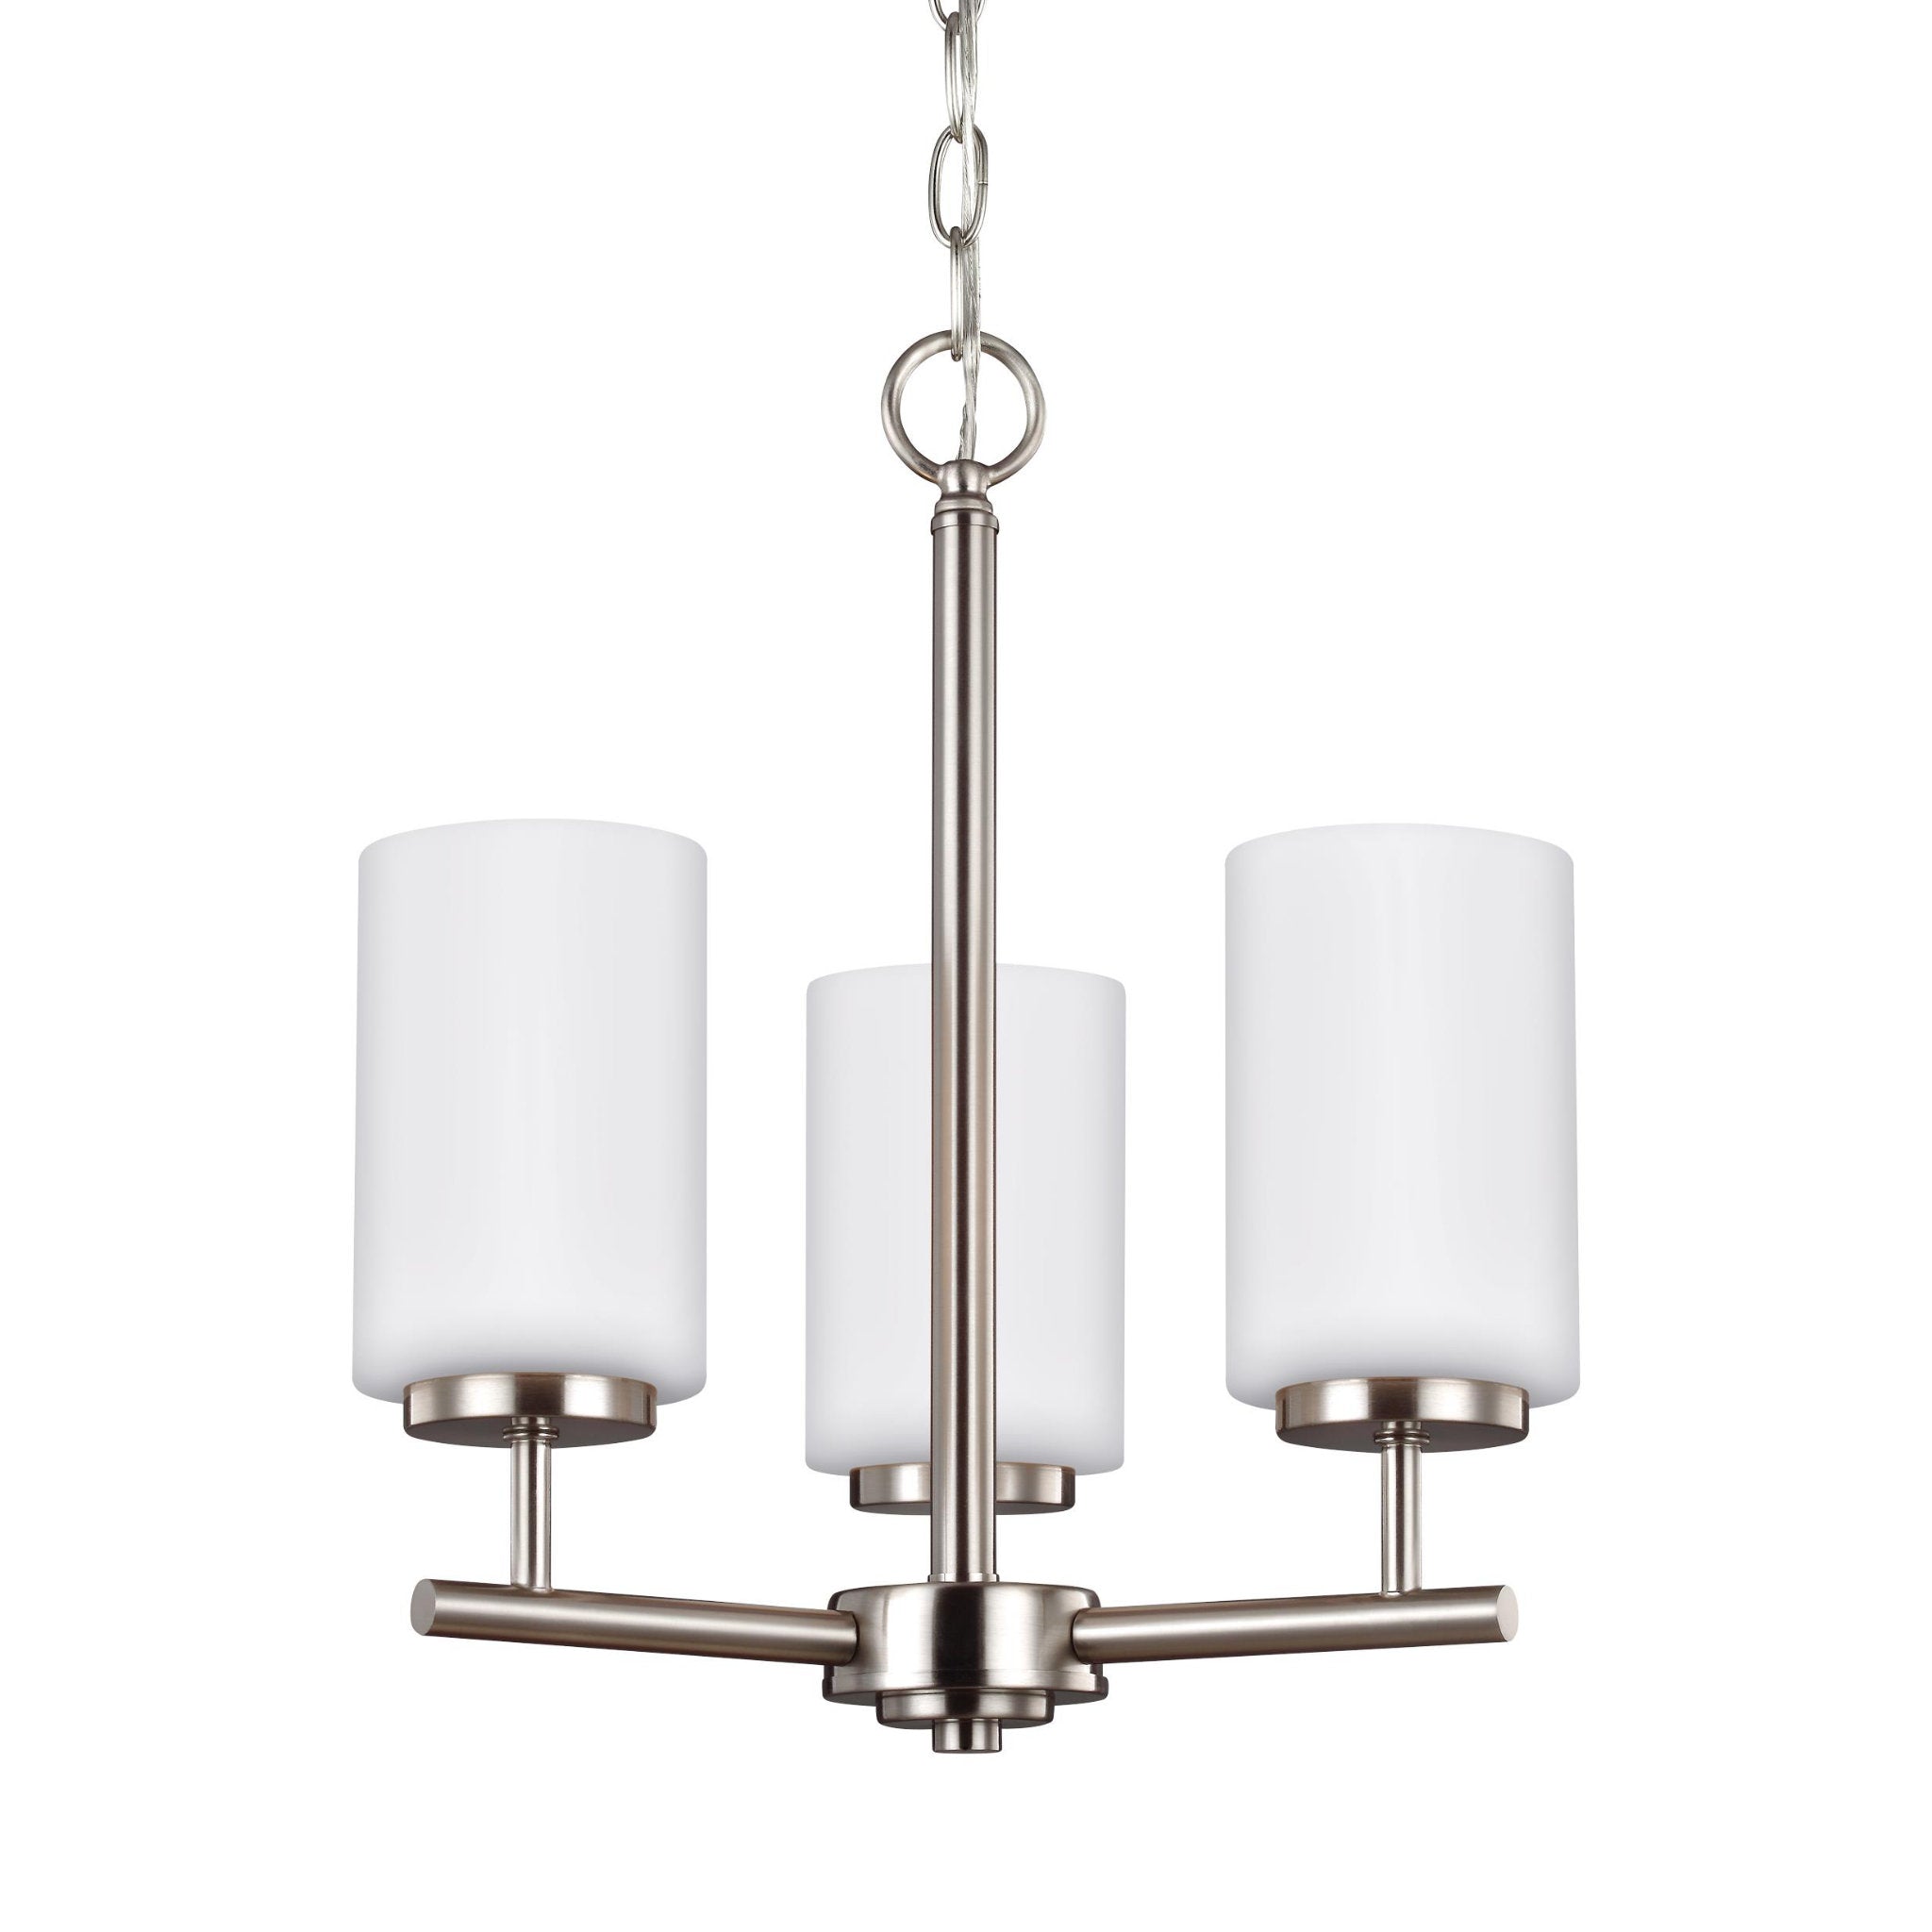 Oslo Three Light Chandelier Contemporary 16.5" Height Steel Round Cased Opal Etched Shade in Brushed Nickel